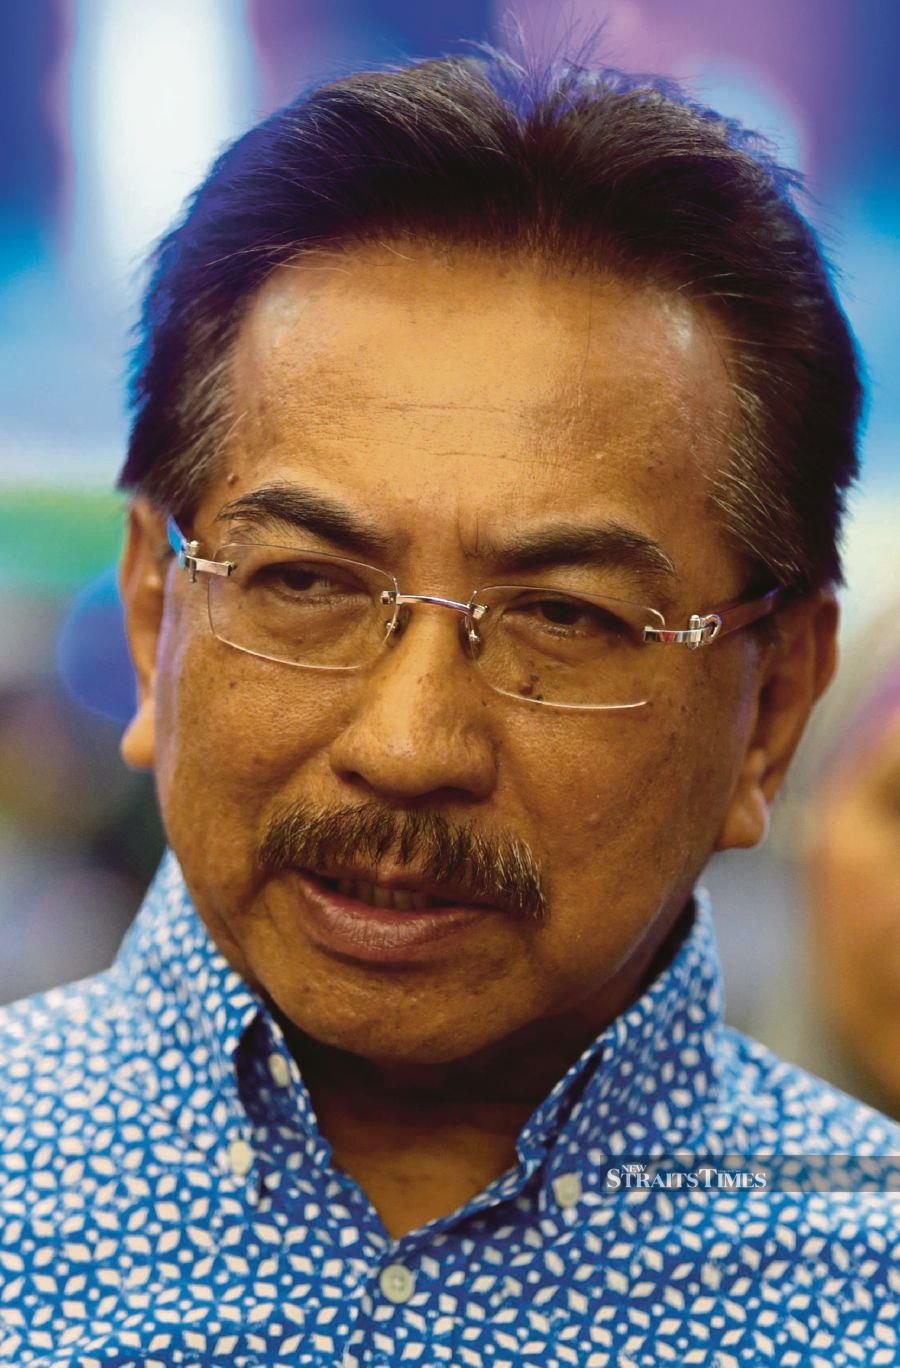 Former Sabah Chief Minister Tan Sri Musa Aman says the late Tan Sri Joseph Kurup was not only a political ally but a loyal friend who was open to discussions and upheld the BN spirit of mutual cooperation and respect. - NSTP pic